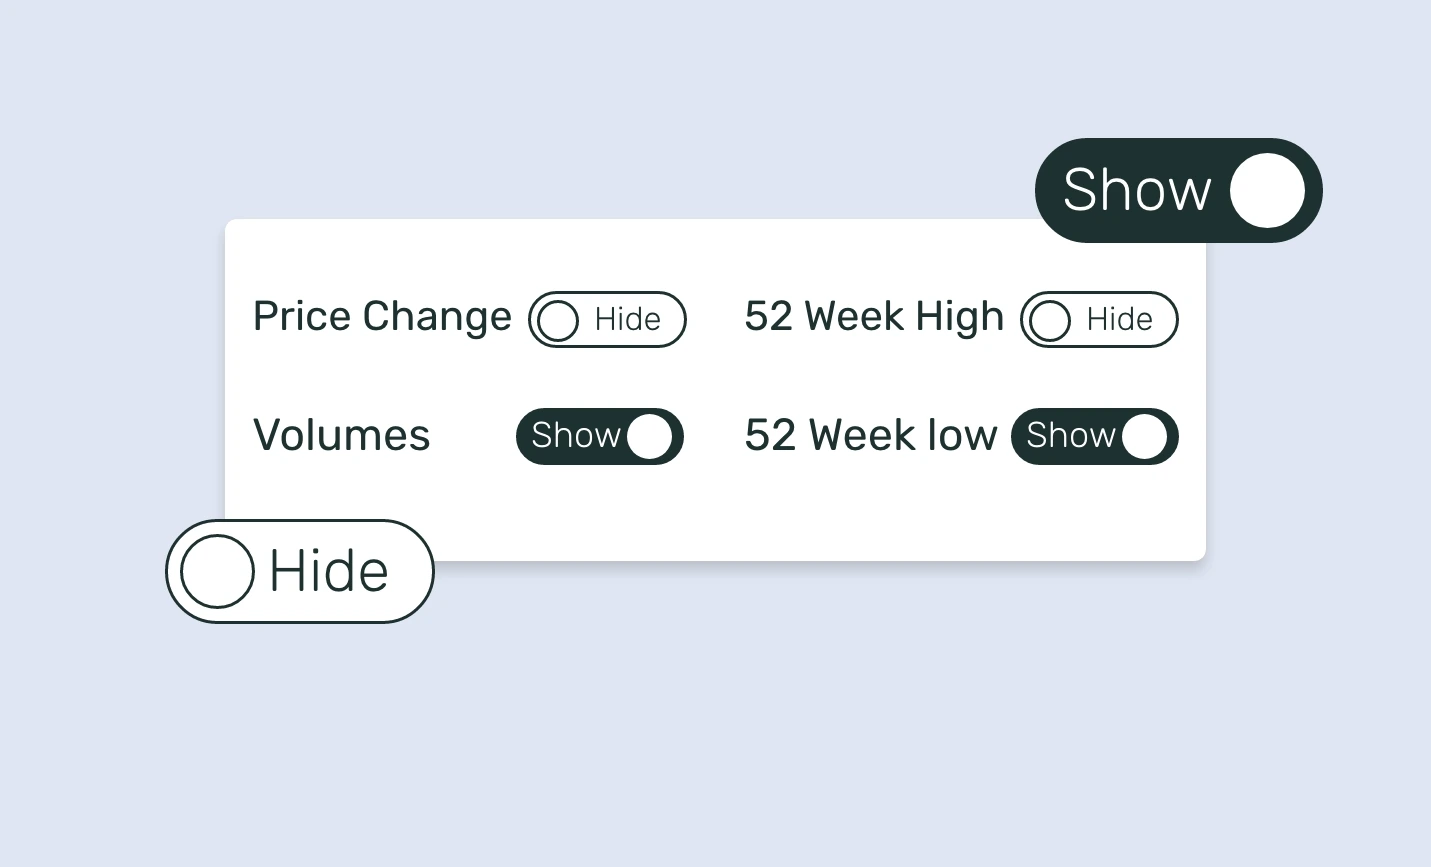 Stocks app interface with features to show/hide price changes, volumes, 52 week high, 52 week low.